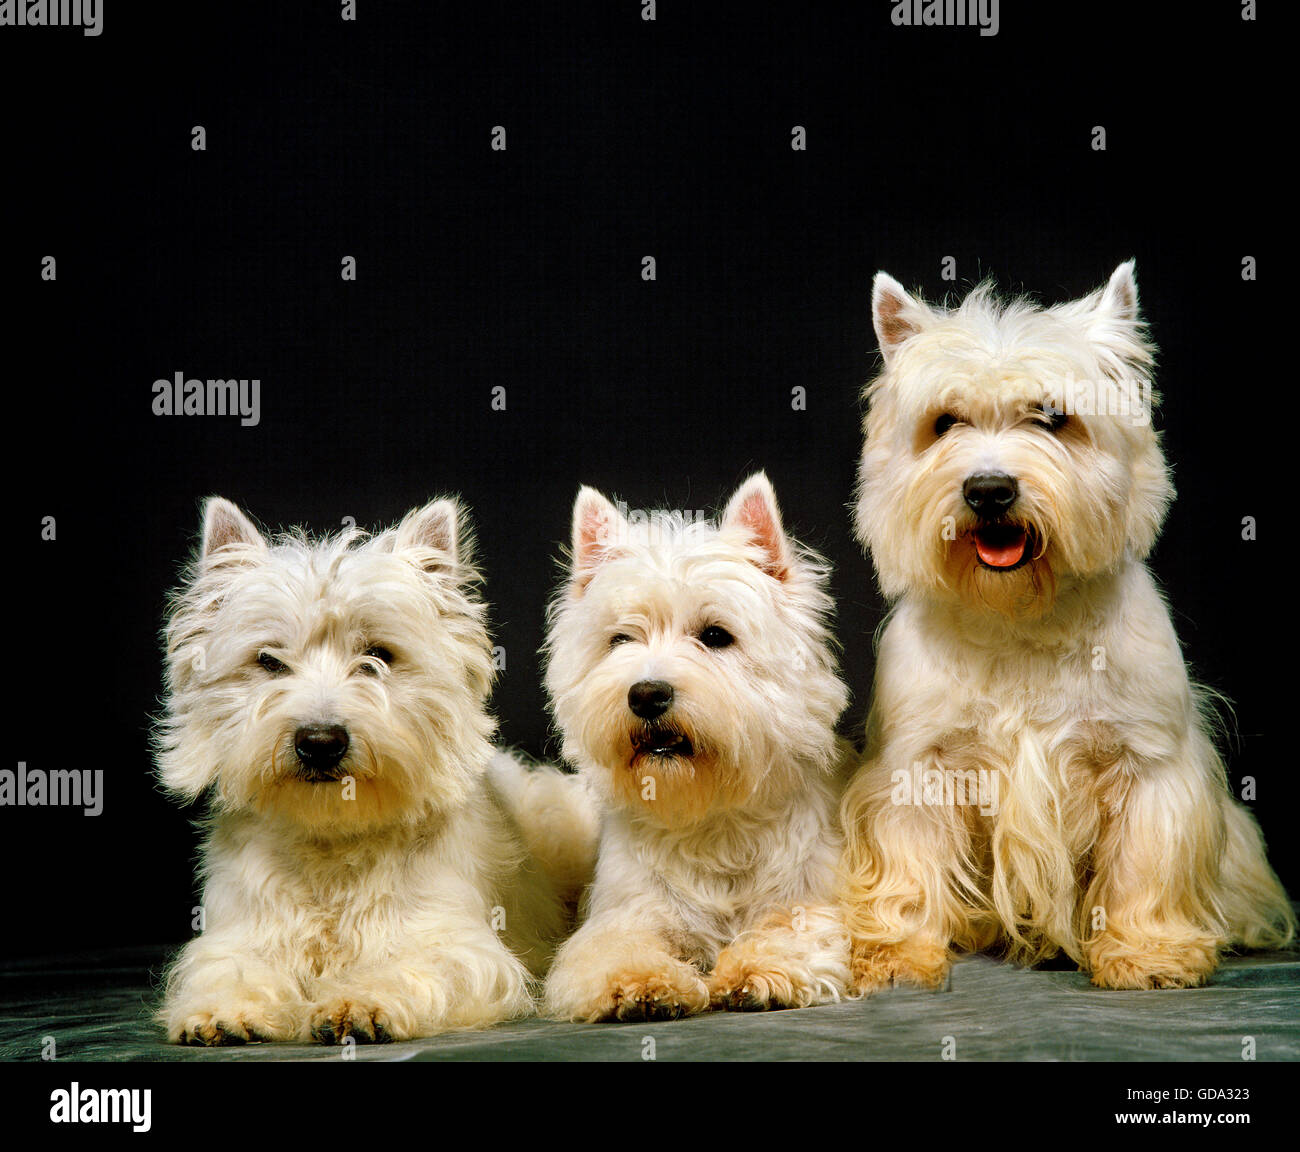 West Highland White Terrier, Adults against Black Background Stock Photo